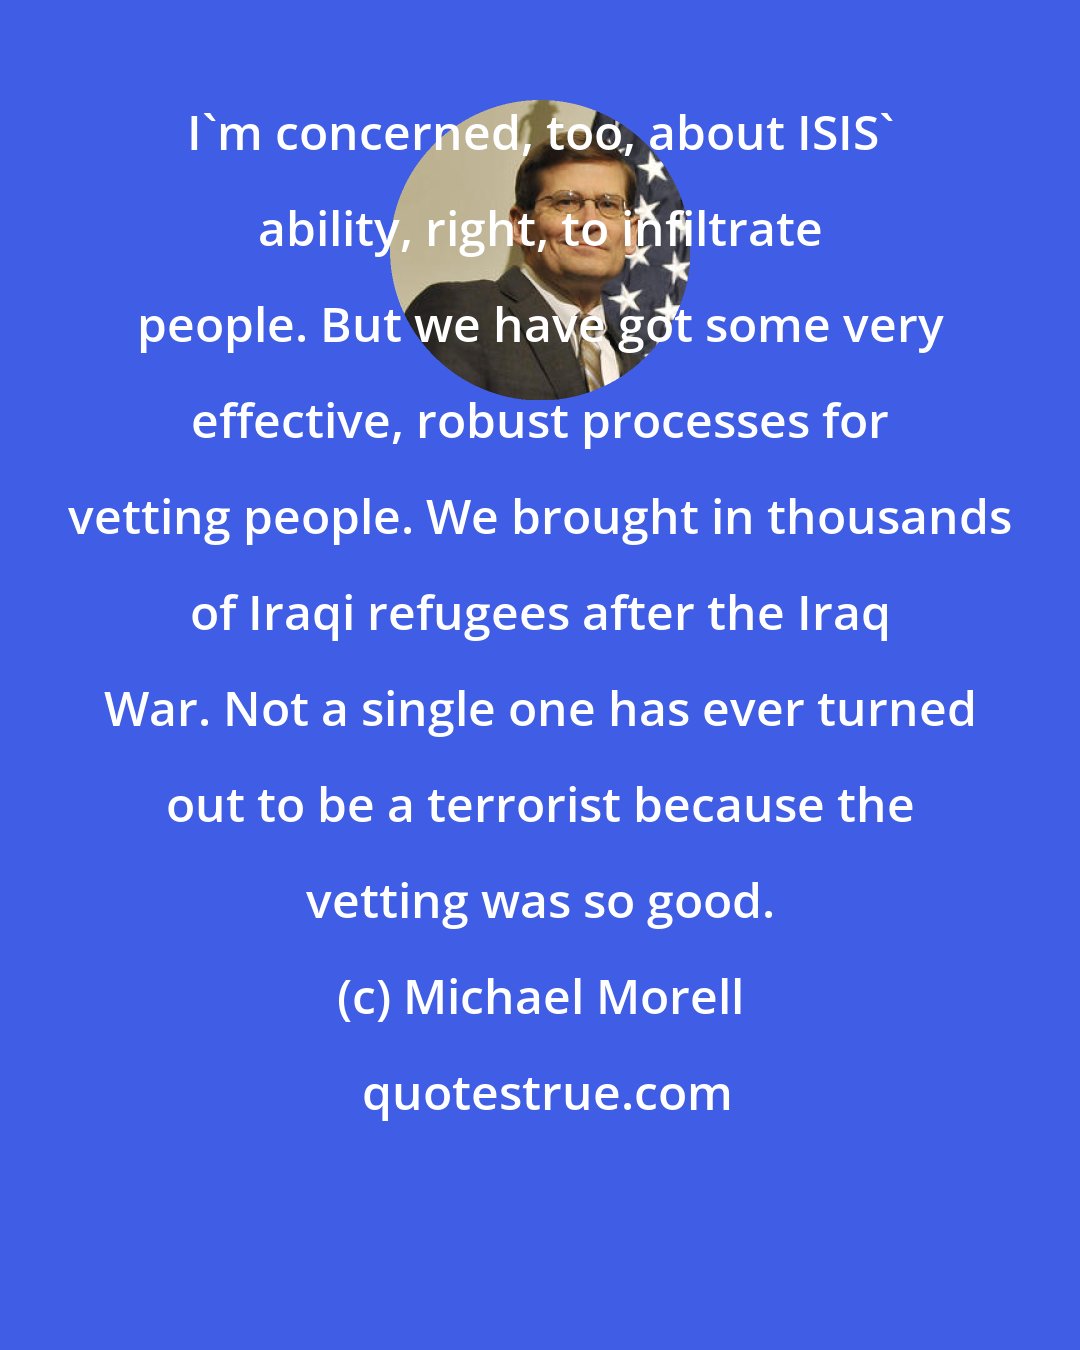 Michael Morell: I'm concerned, too, about ISIS' ability, right, to infiltrate people. But we have got some very effective, robust processes for vetting people. We brought in thousands of Iraqi refugees after the Iraq War. Not a single one has ever turned out to be a terrorist because the vetting was so good.